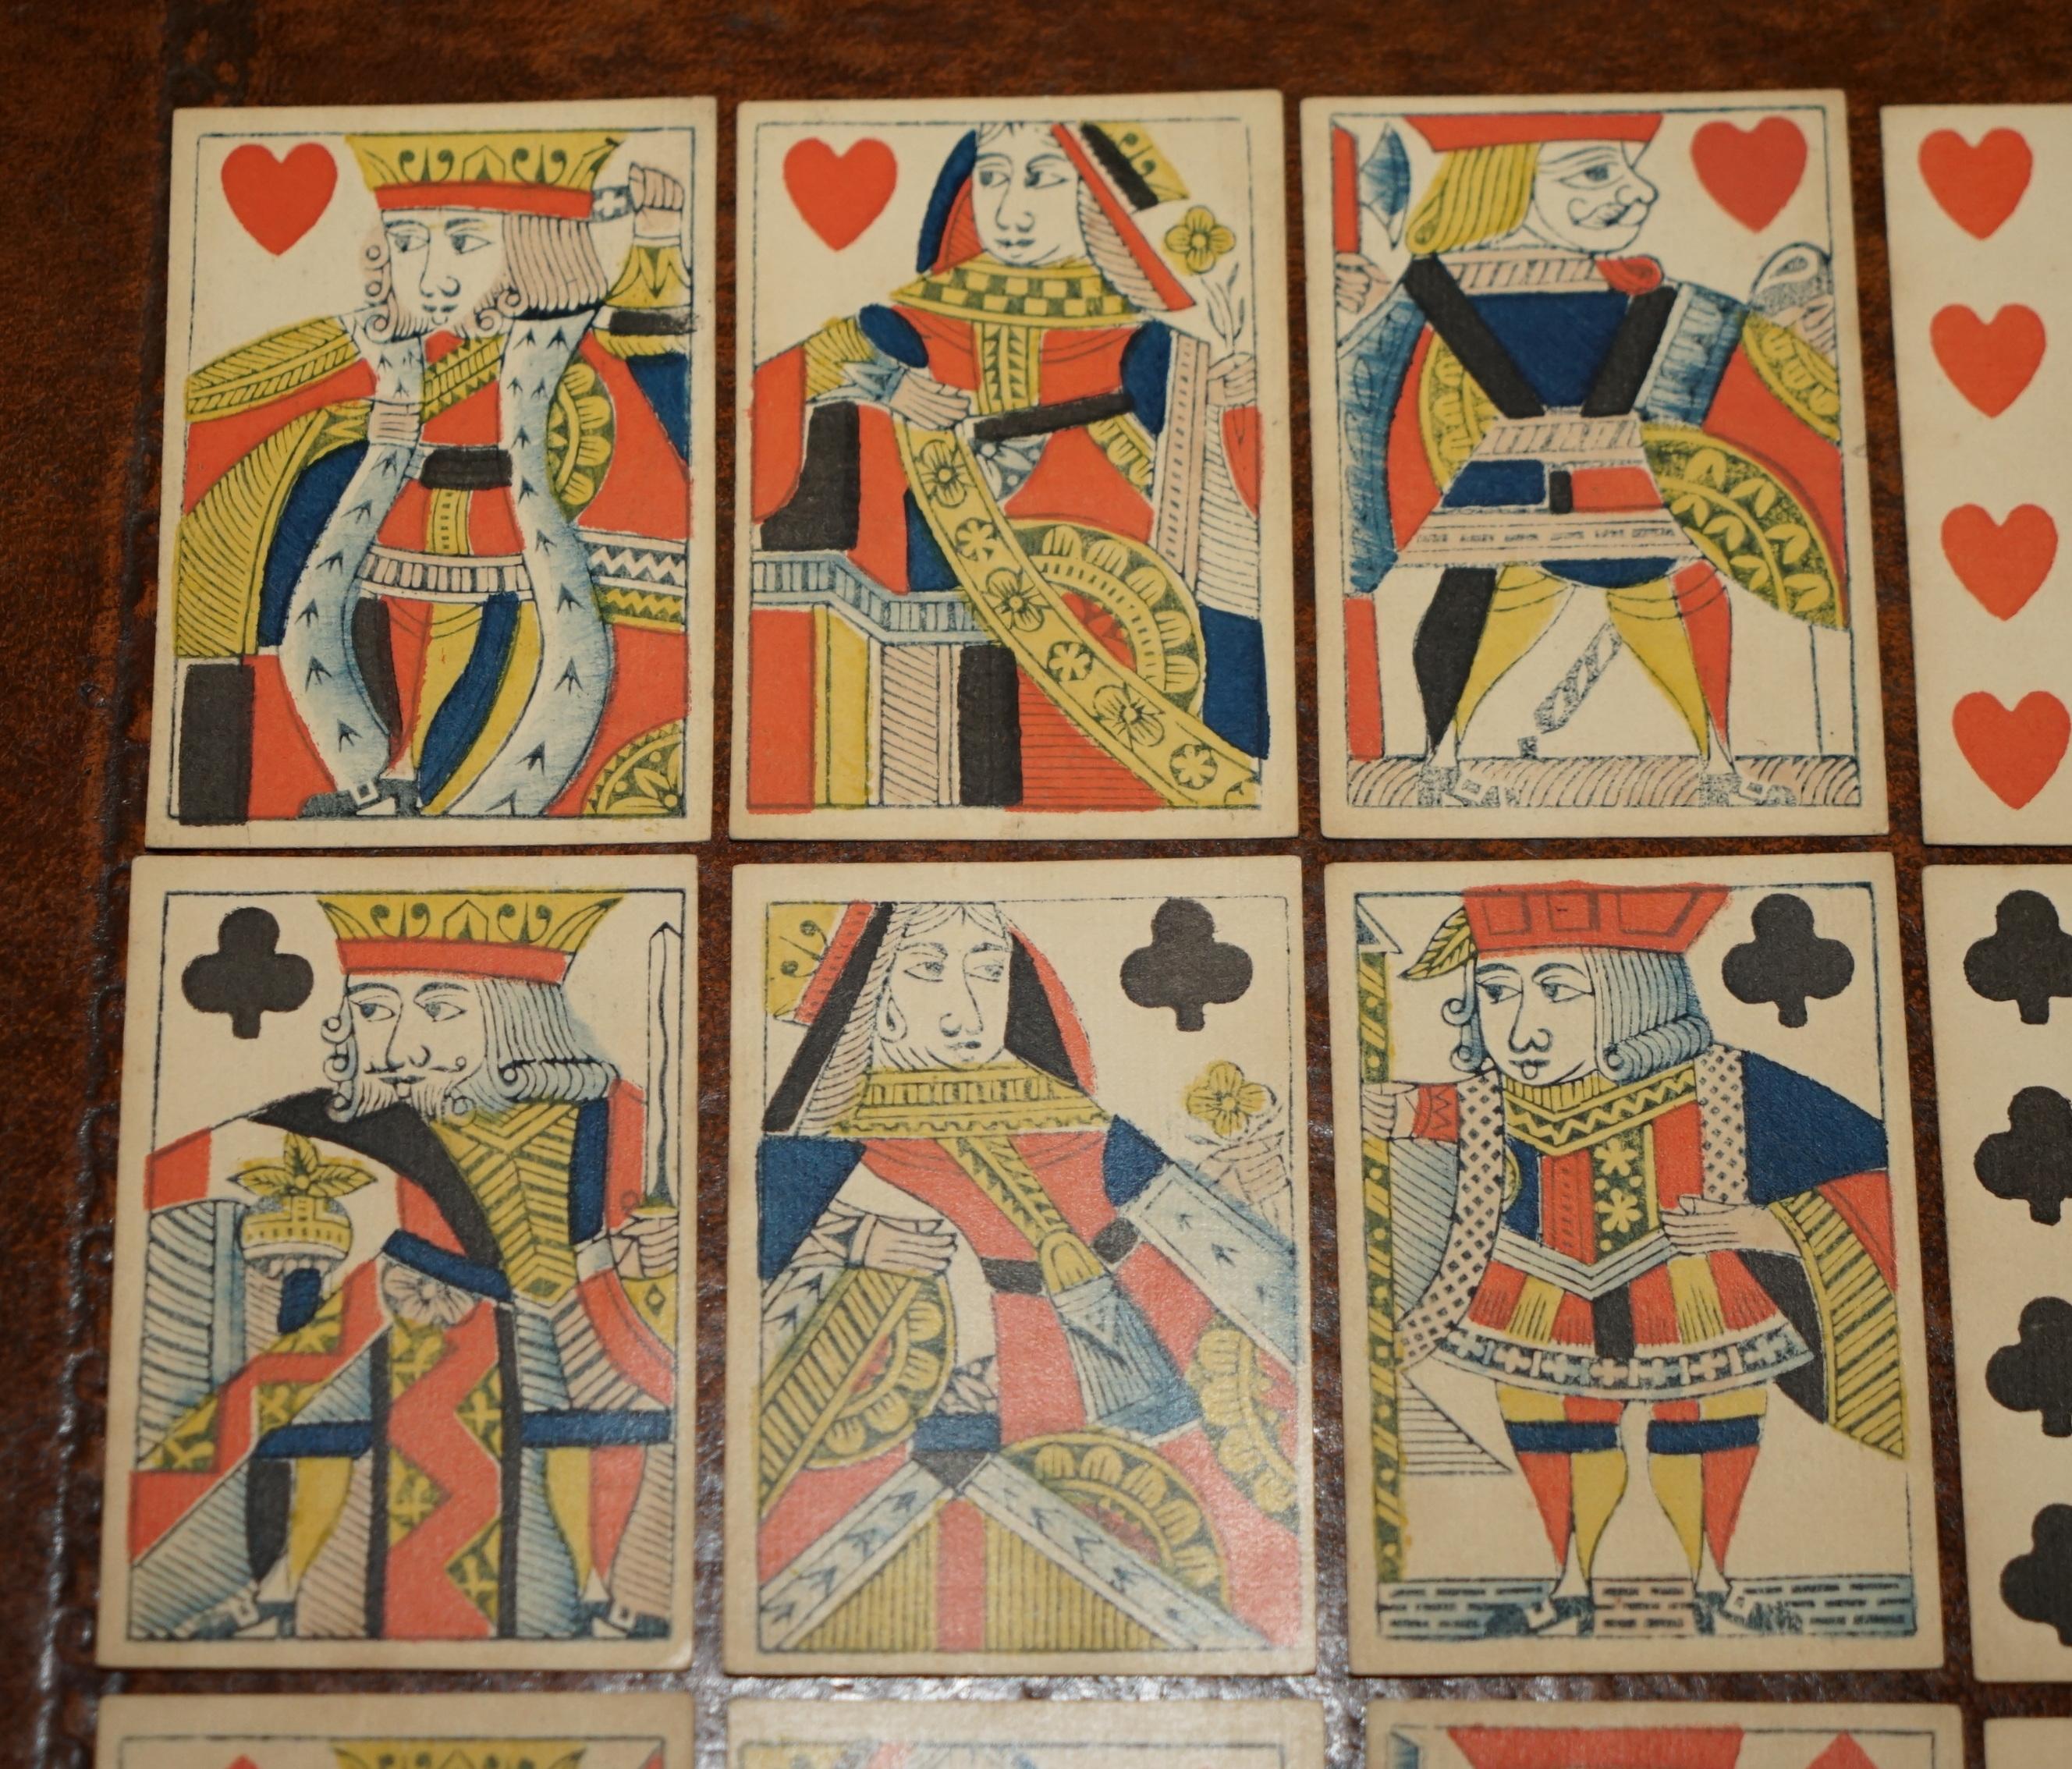 English ANTIQUE 1830 THOMAS CRESWICK GEORGIAN PLAYiNG CARDS WITH FIZZLE ACE OF SPADES For Sale